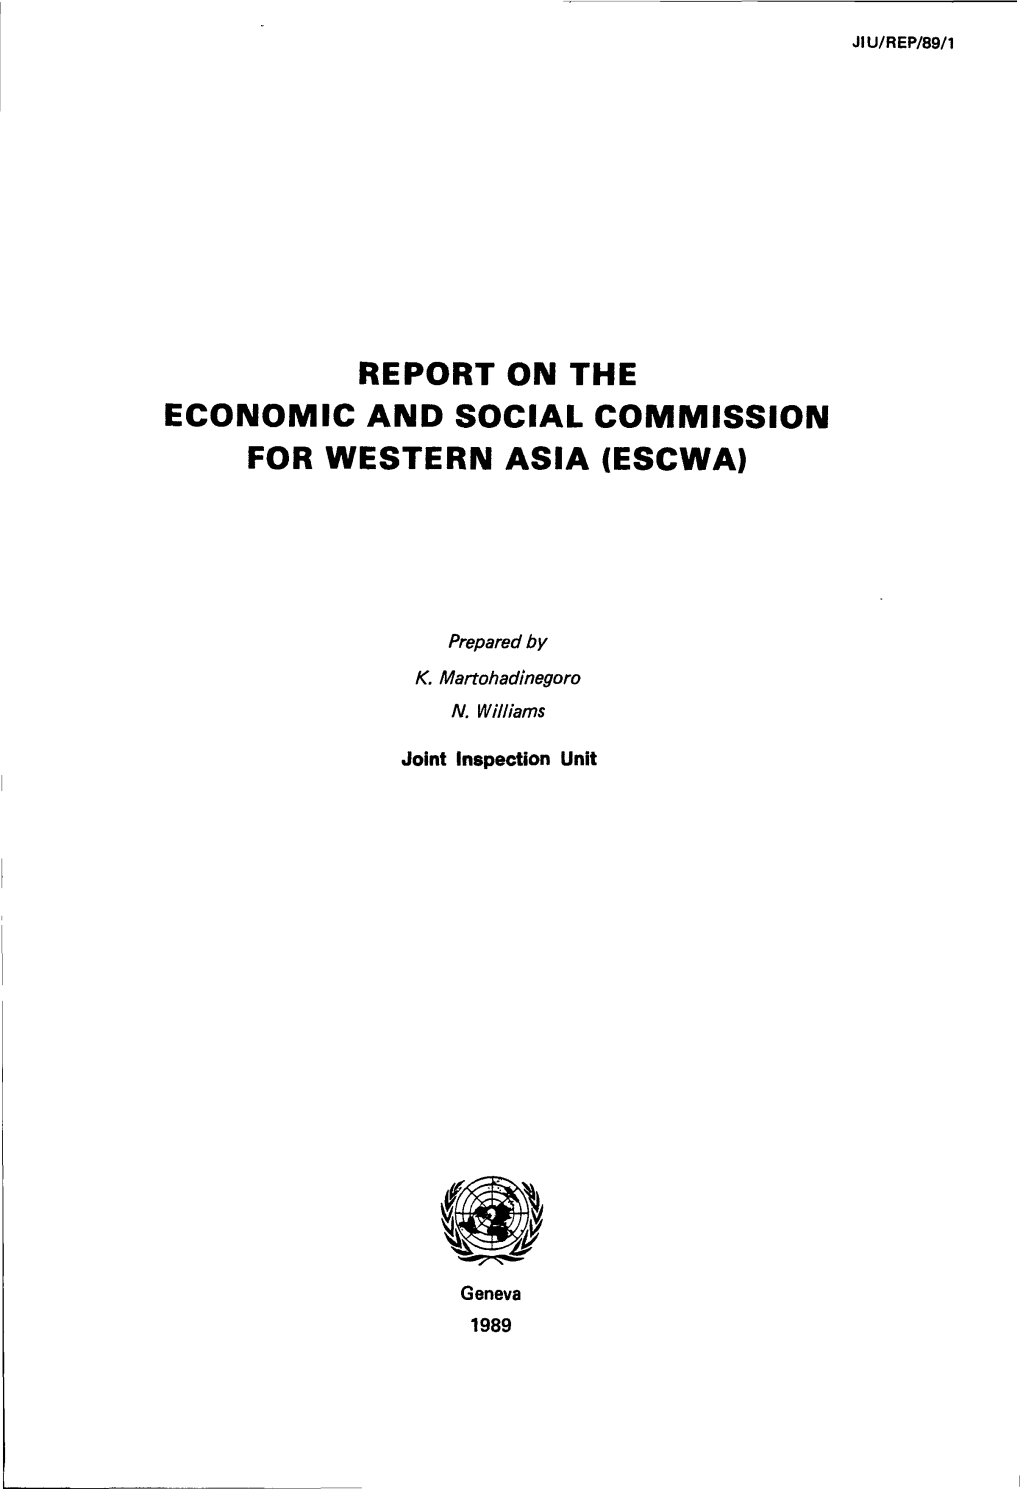 Report on the Economic and Social Commission for Western Asia (Escwa)